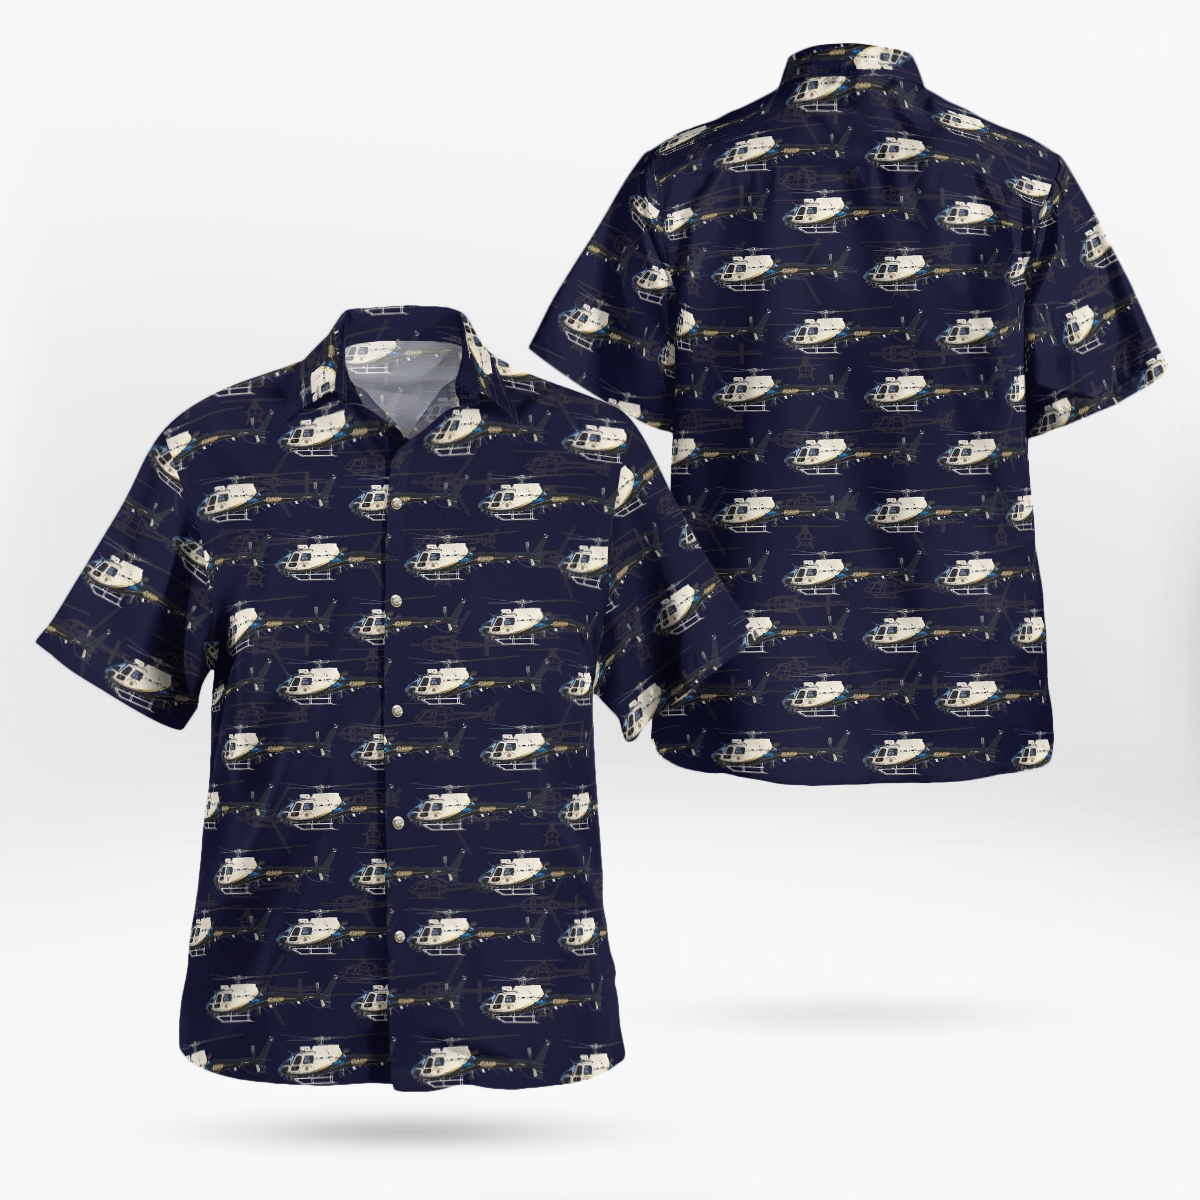 Consider getting these Hawaiian Shirt for your friends 357